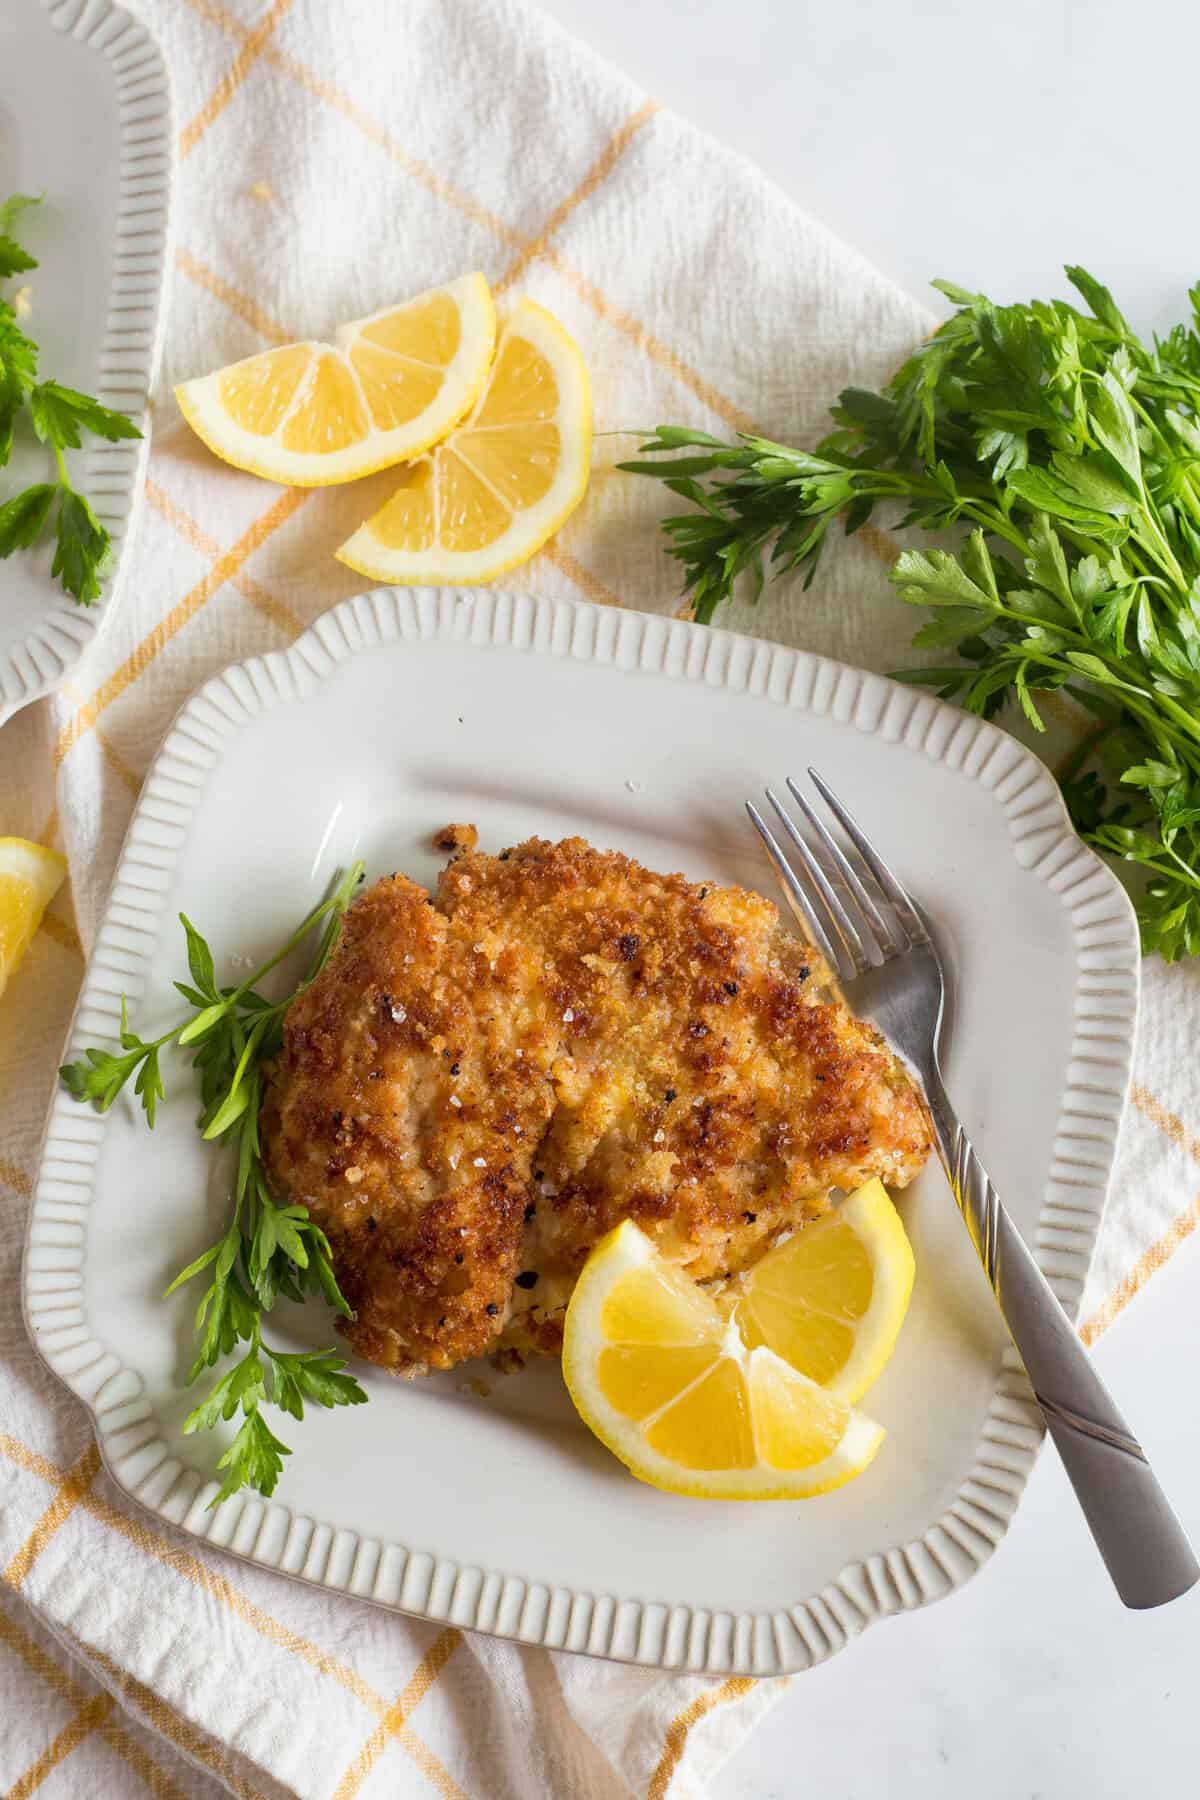 Chicken schnitzel with lemon wedges on a white plate.